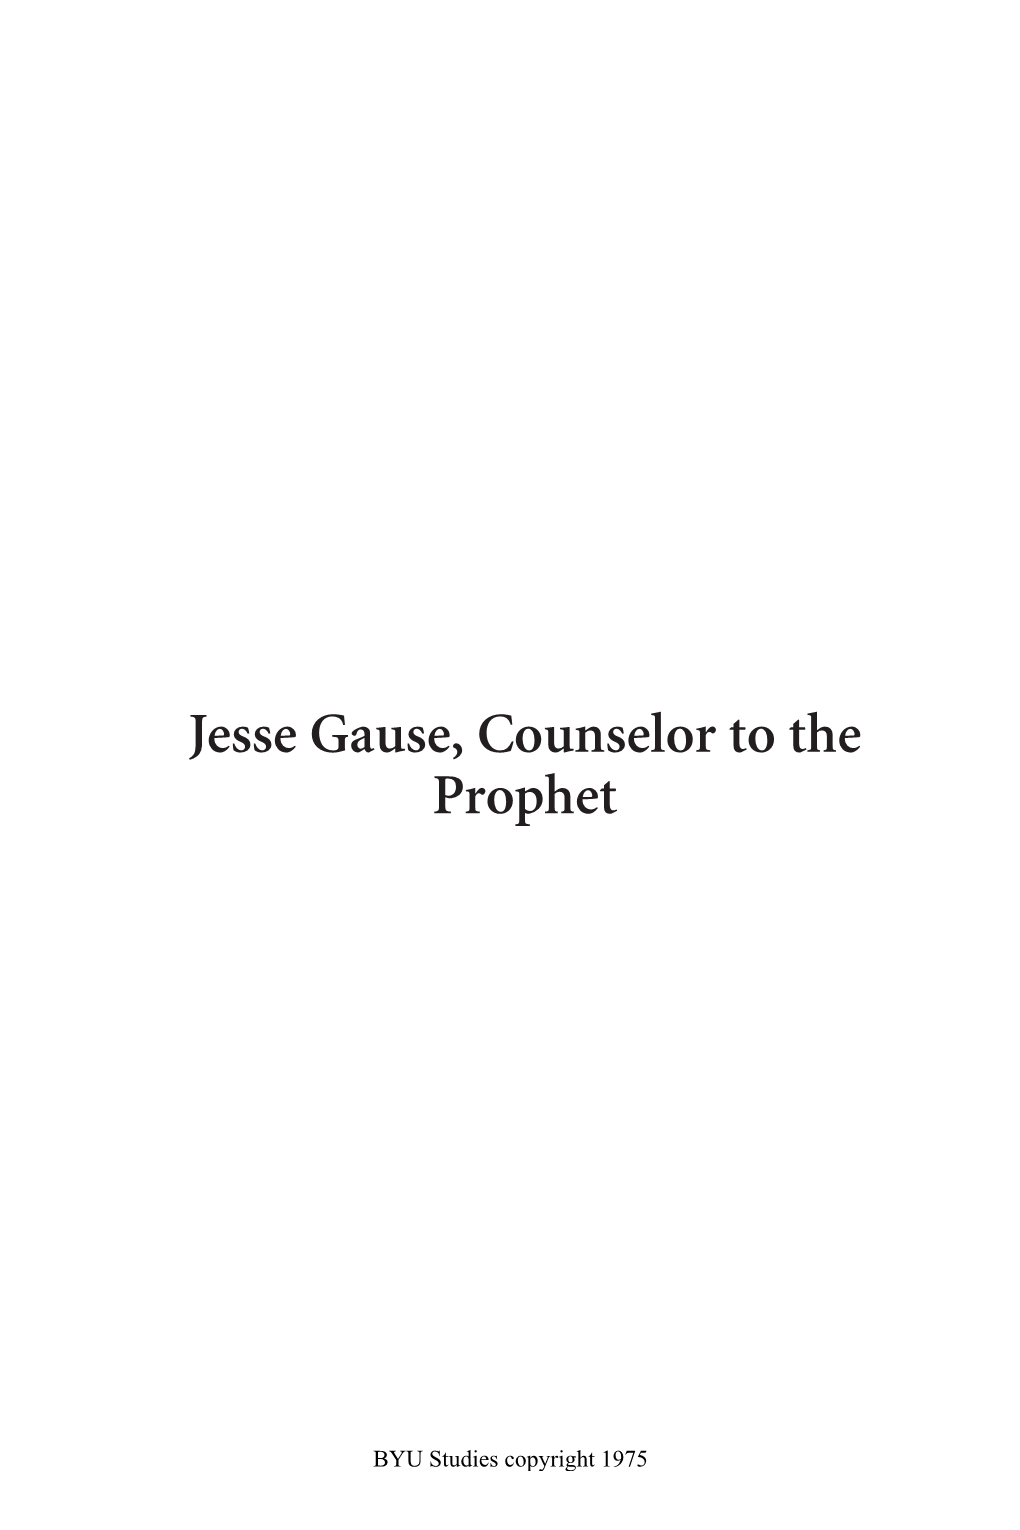 Jesse Gause, Counselor to the Prophet